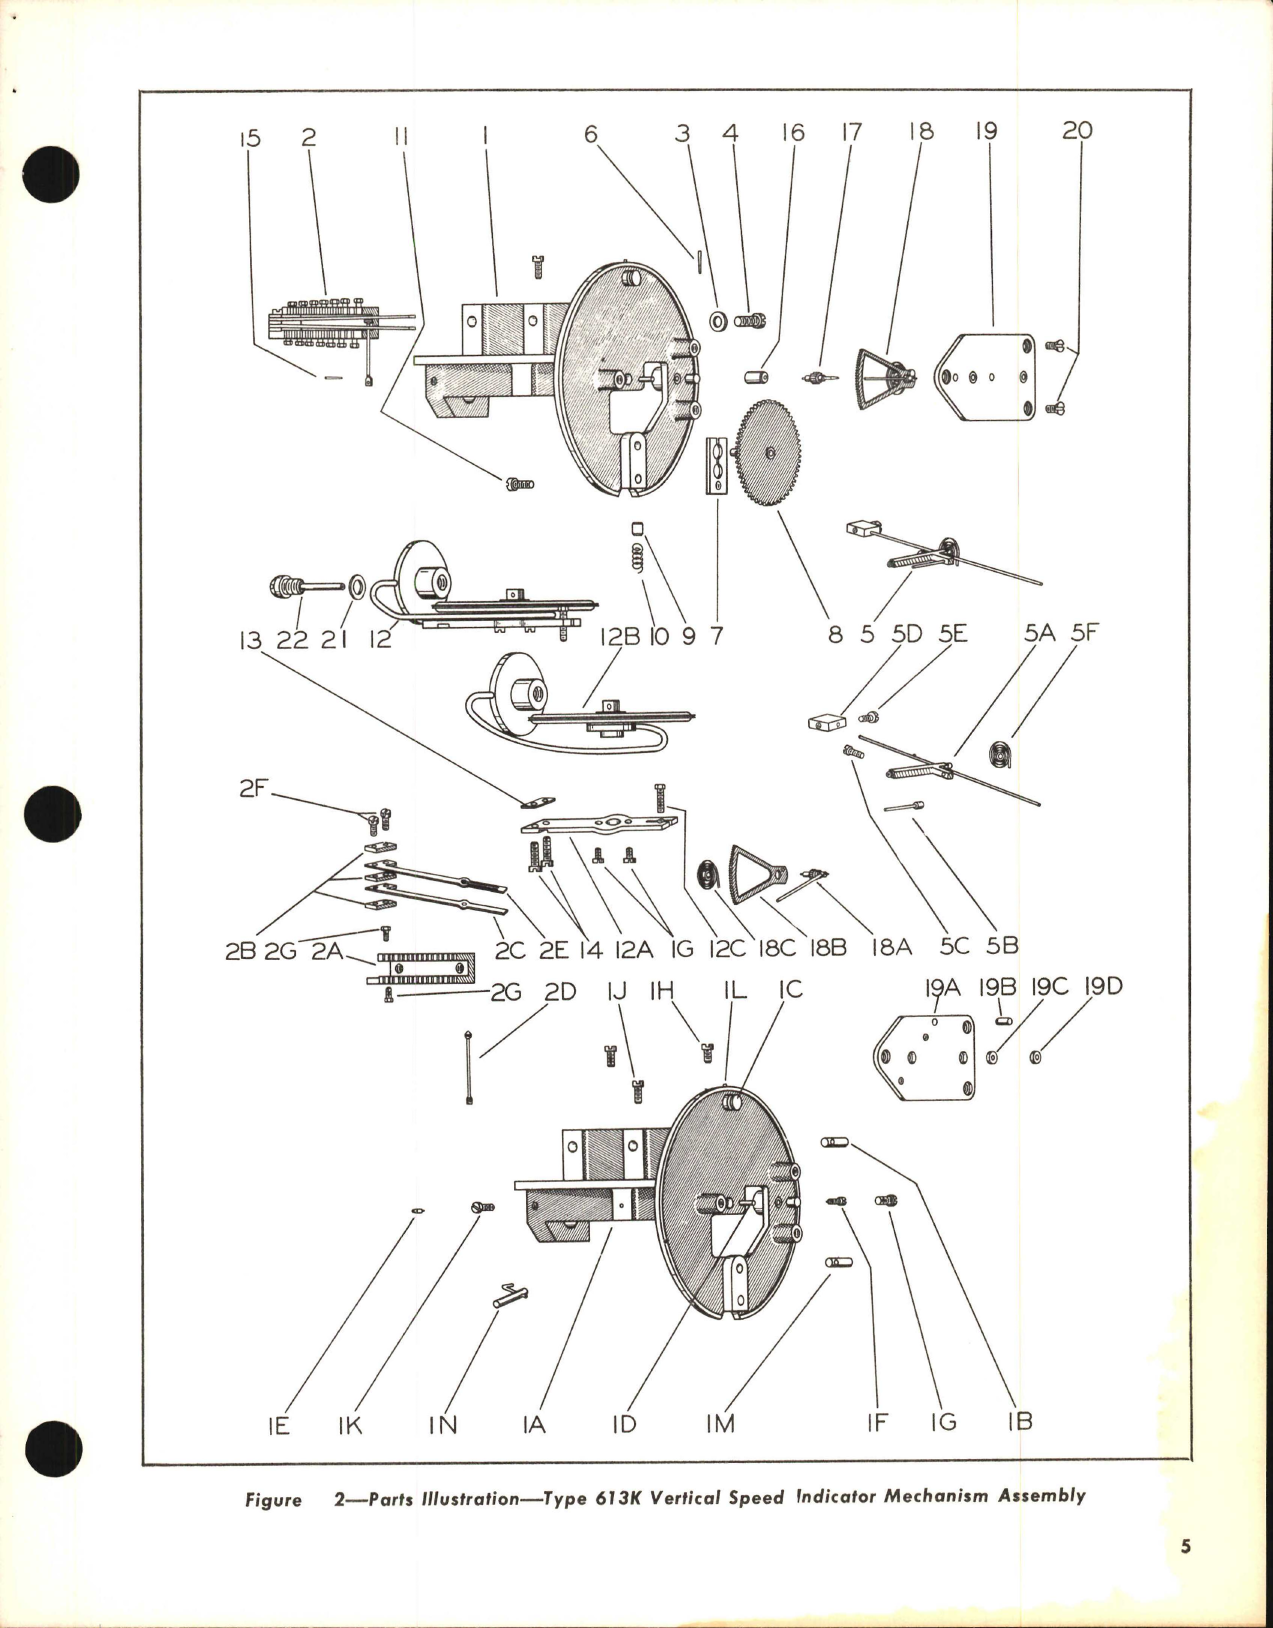 Sample page 5 from AirCorps Library document: Illustrated Parts Breakdown for Kollsman Vertical Speed Indicators